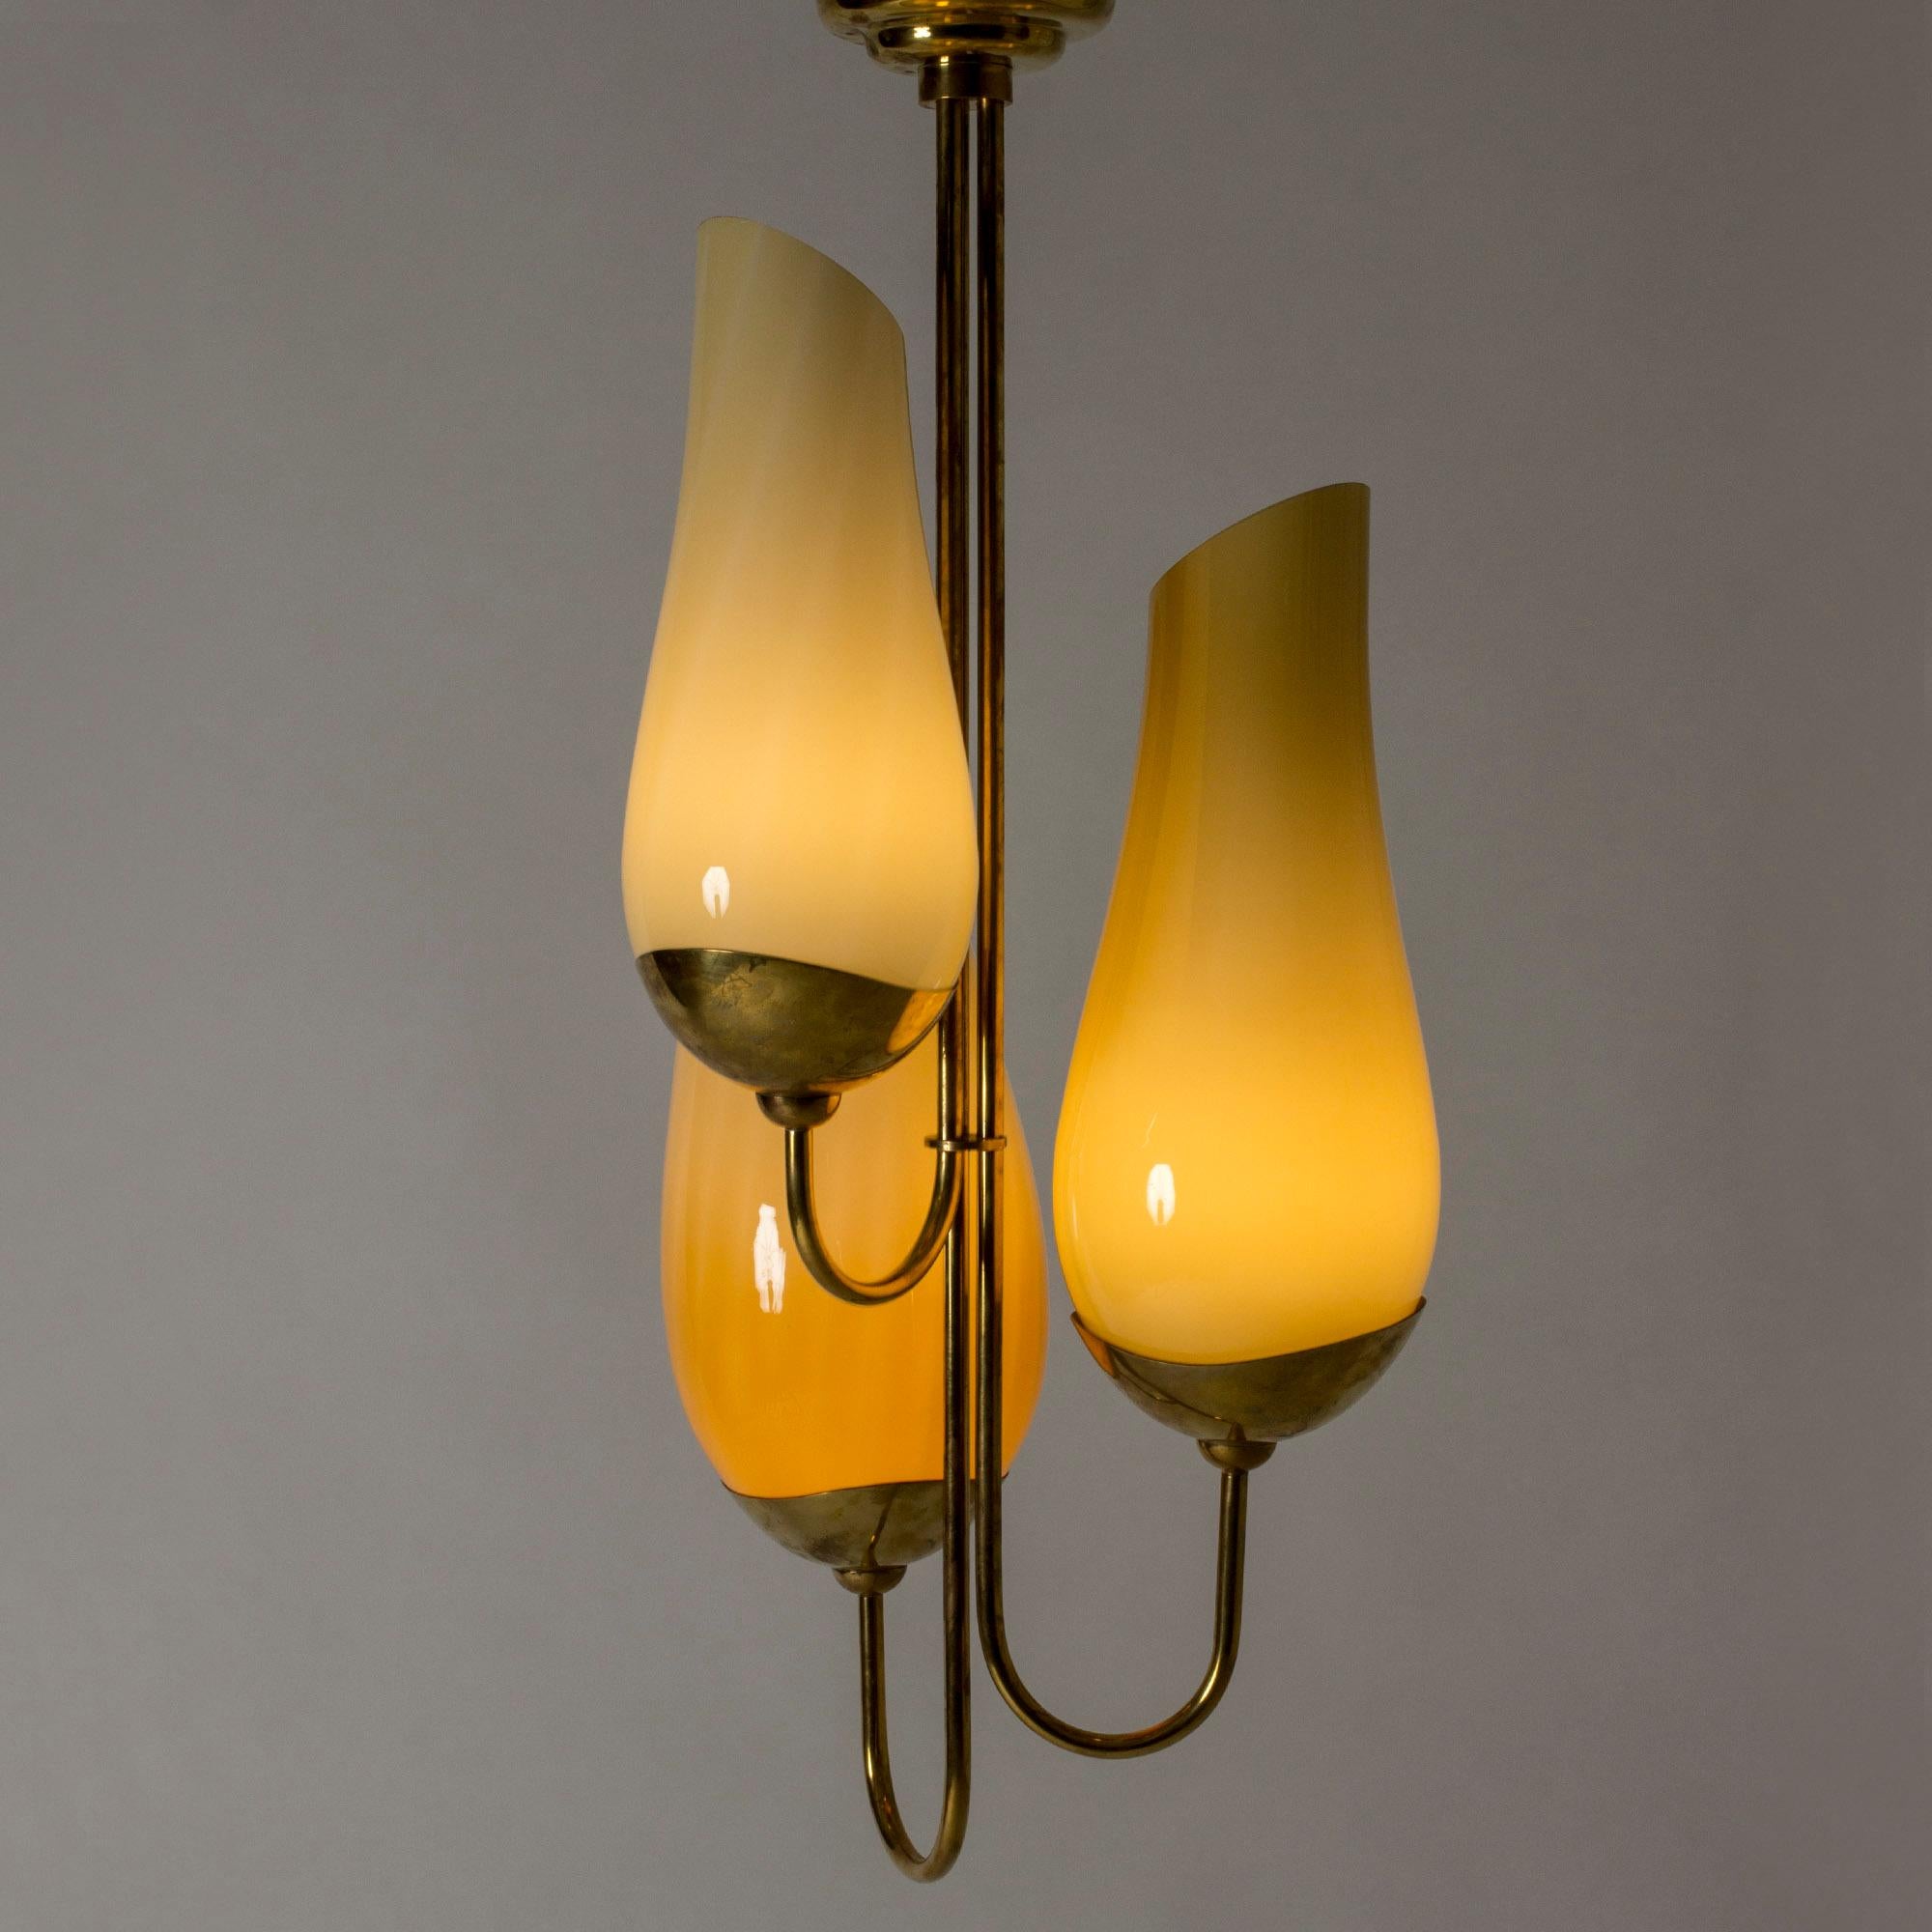 Captivating chandelier by Gunnel Nyman and Paavo Tynell, made from brass with light yellow glass shades. Impressive size. The form of the shades is reminiscent of calla lilies, each a slightly different size. A subtle pattern can be seen in the